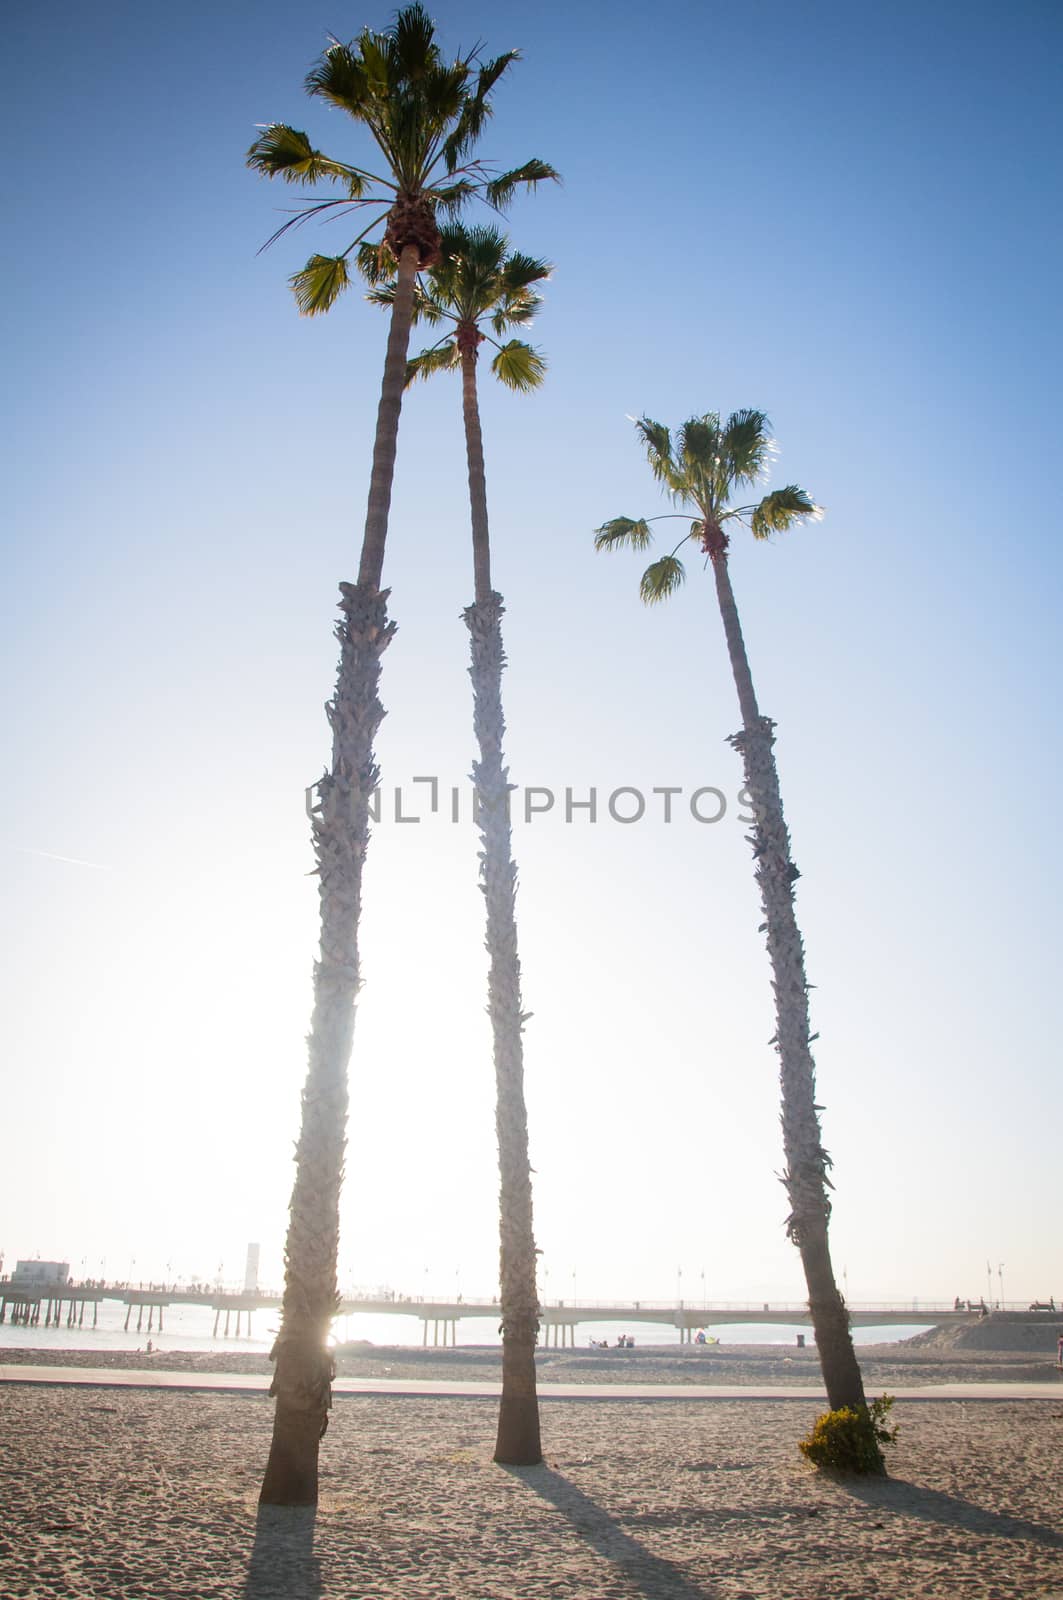 Palm tree silhouette with a beach pier on the background under a bright blue sky sunset